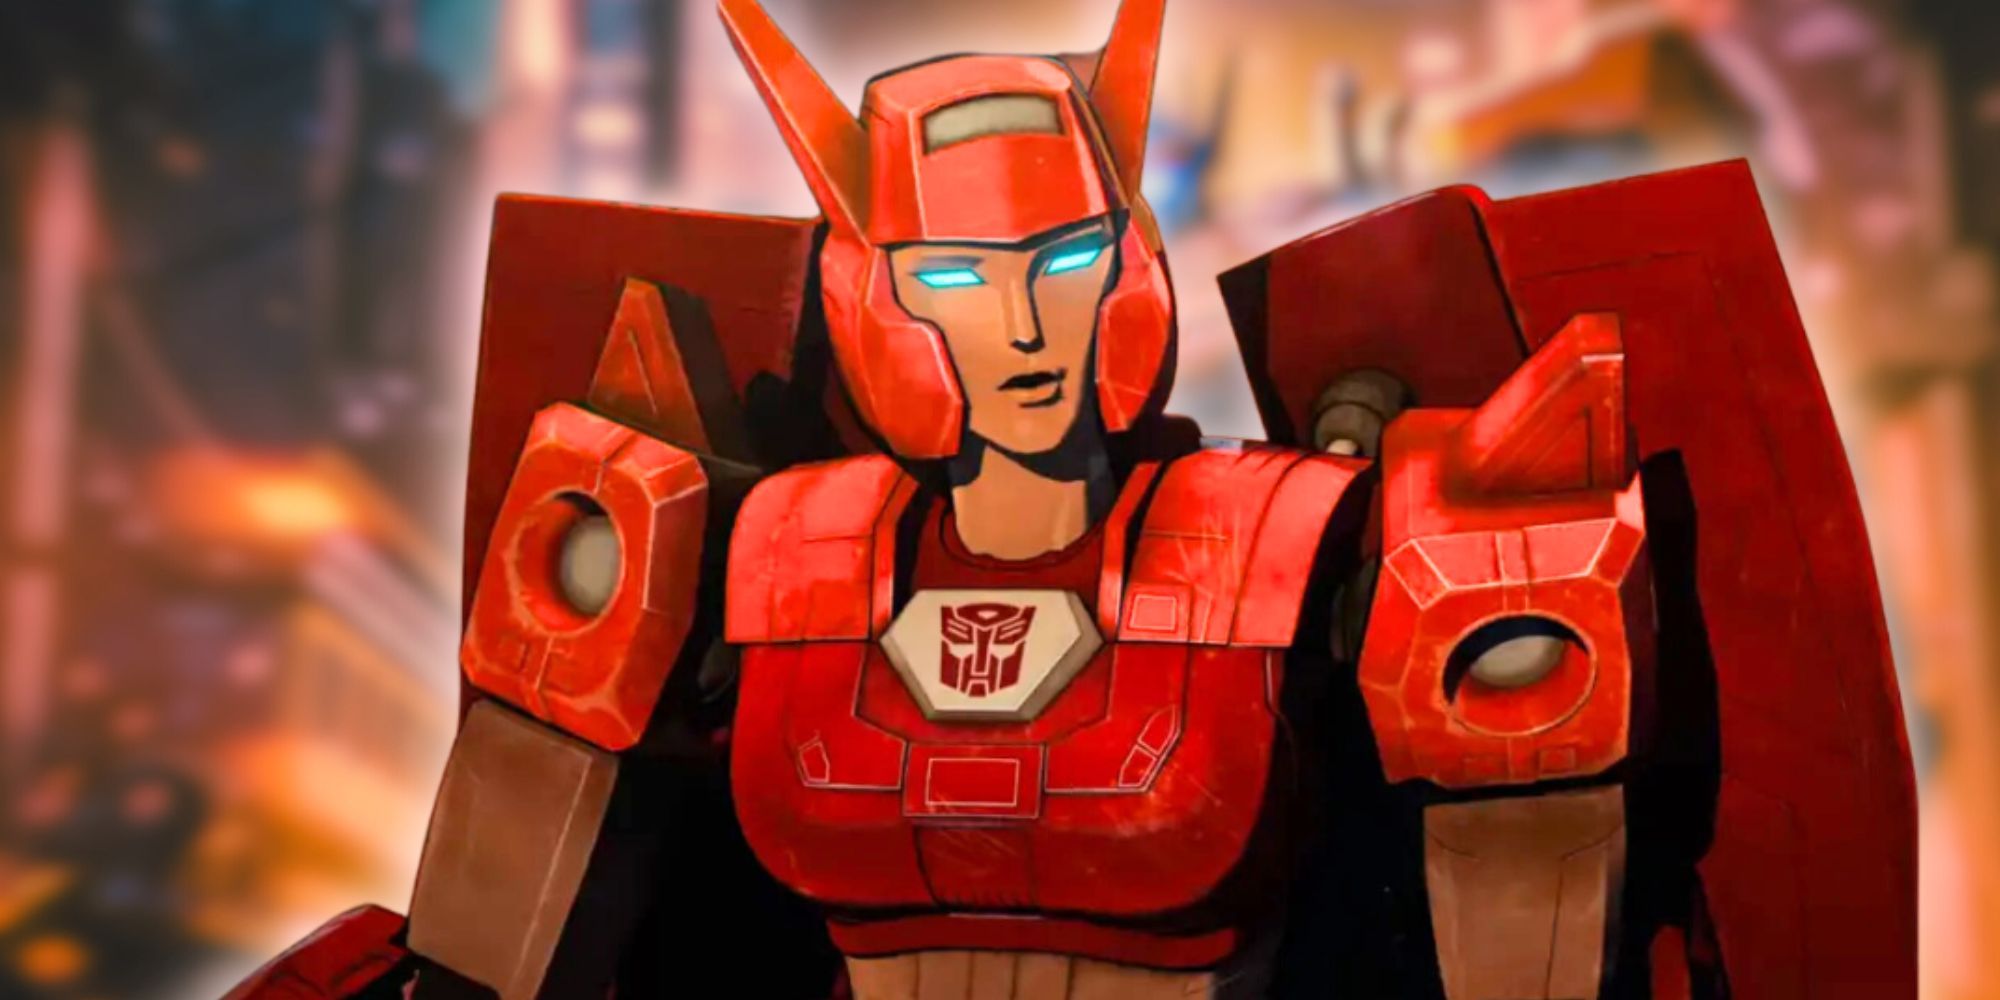 Elita-1 with Transformers One blurred background